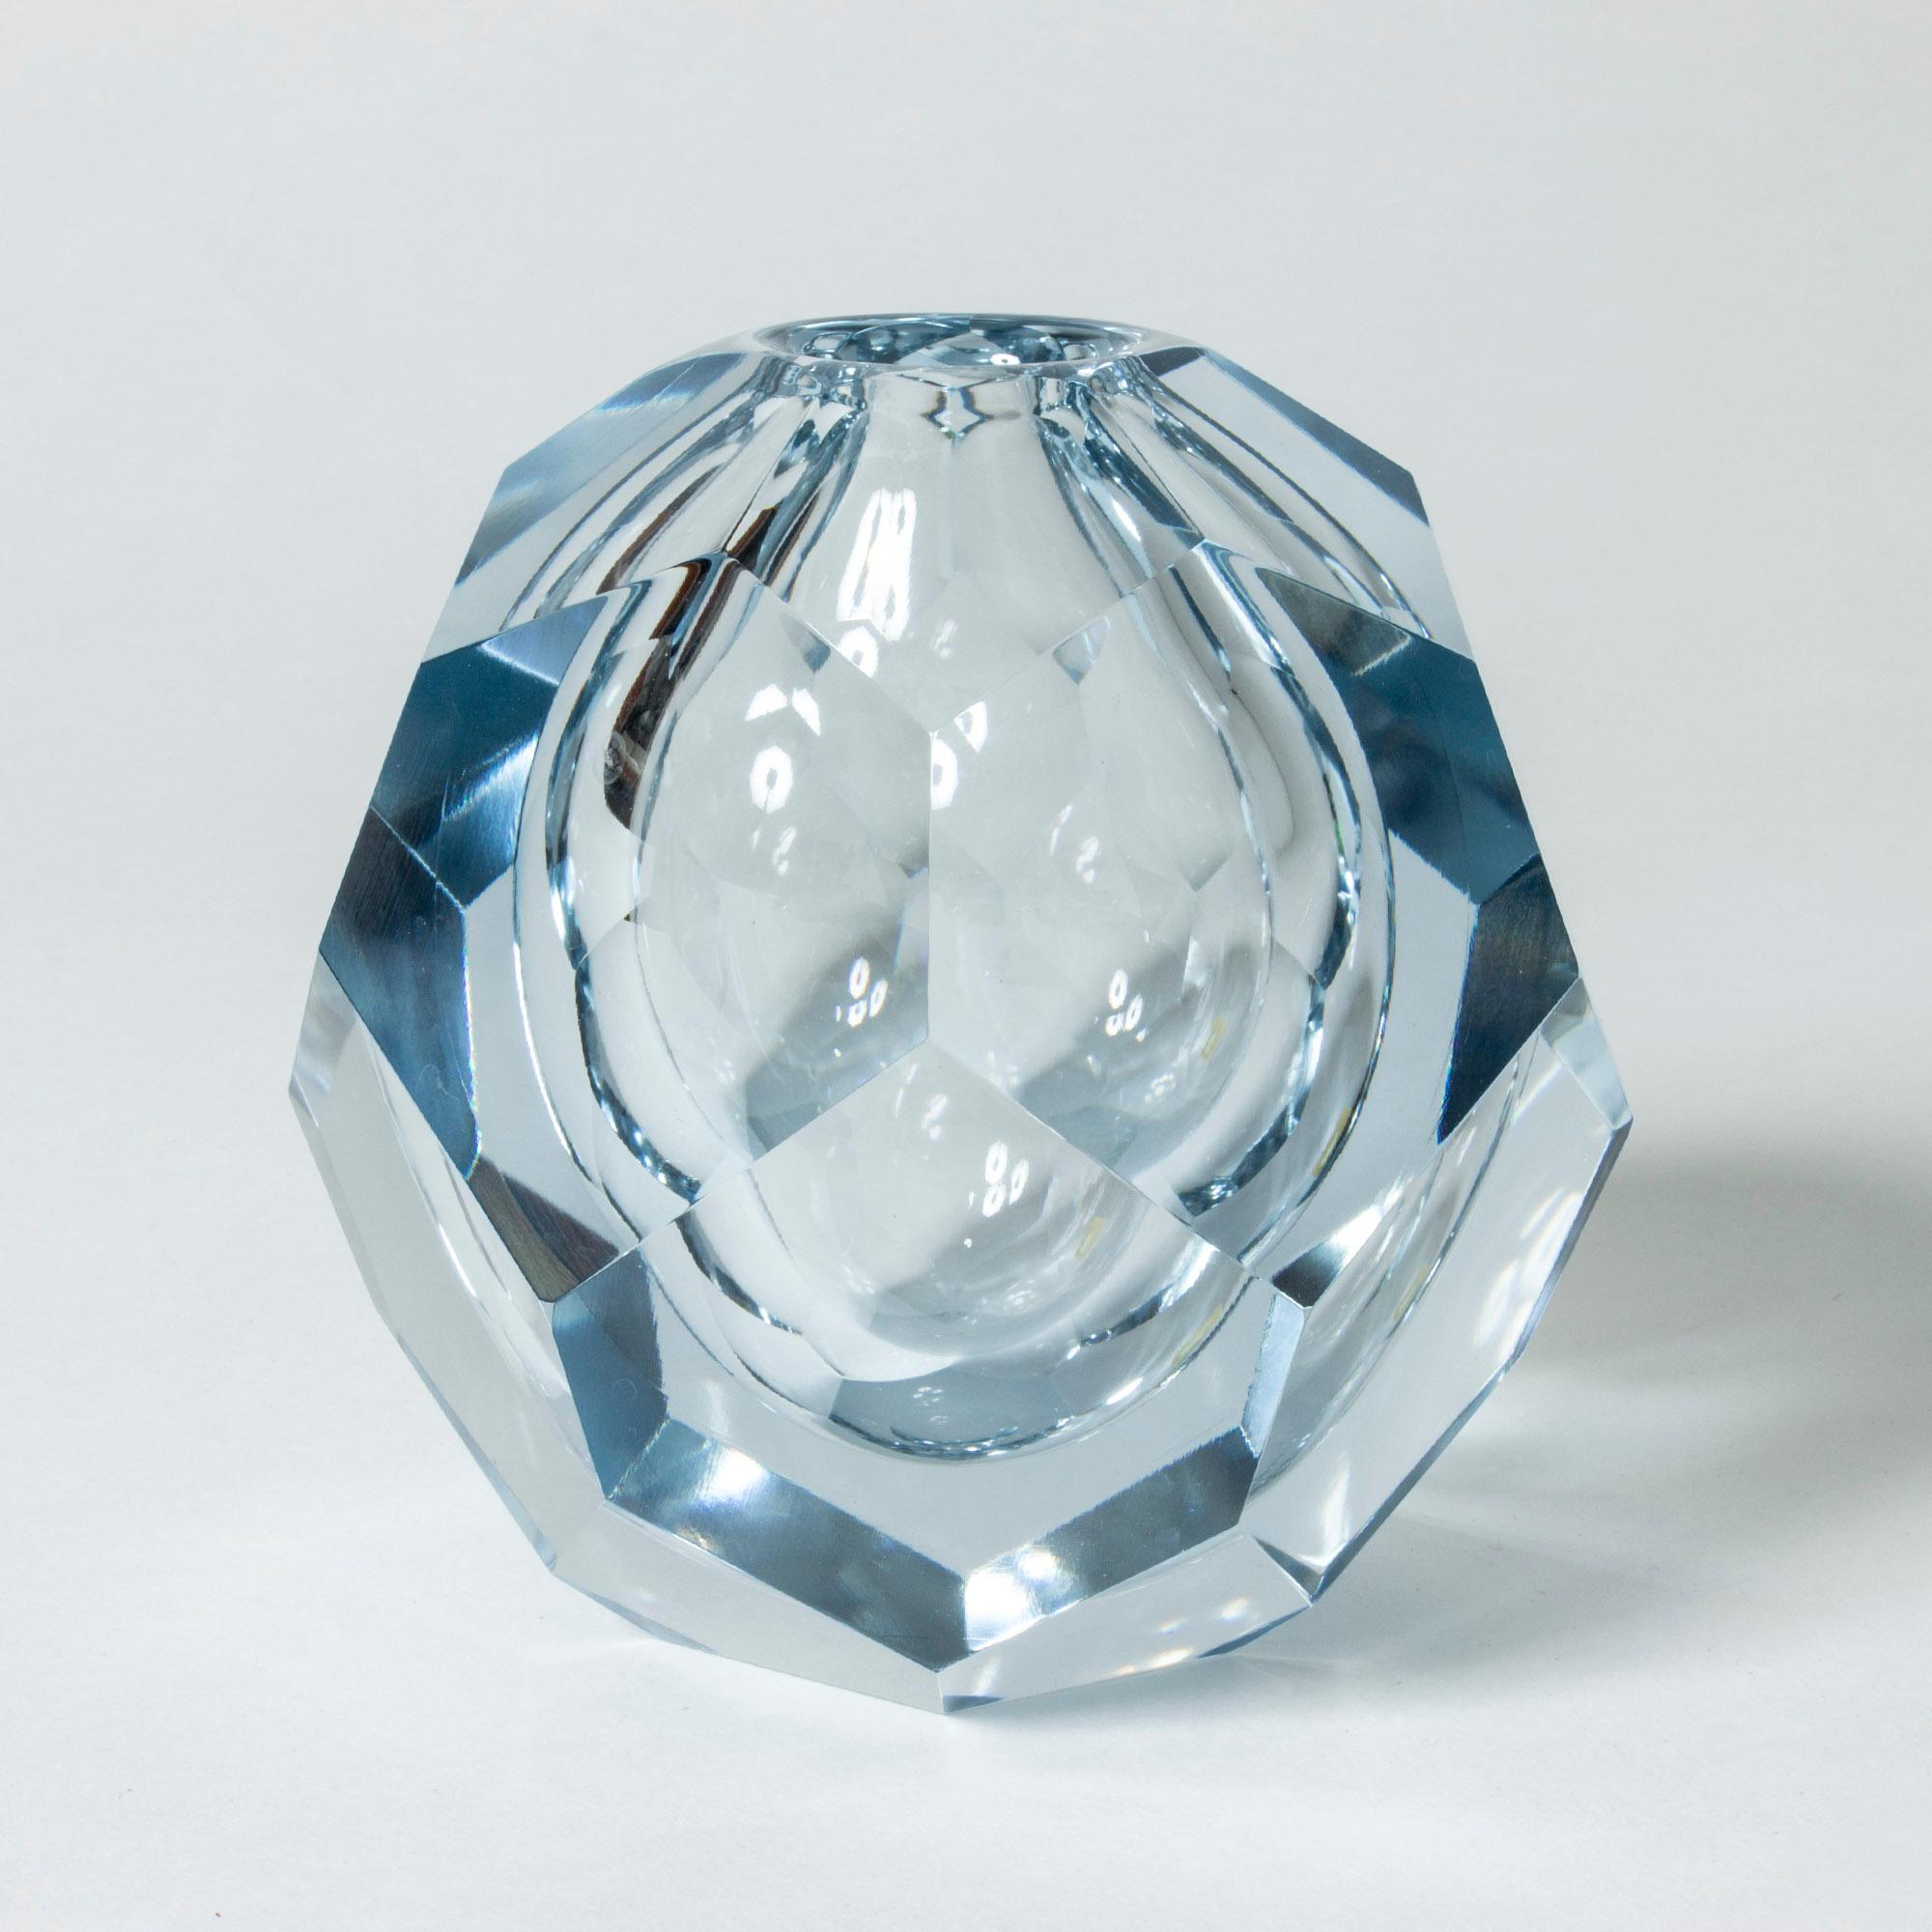 Crystal “Prisma” vase by Asta Strömberg, in heavy quality and a pale blue tone. Cut with numerous smooth facets that create a striking, melting ice effect.